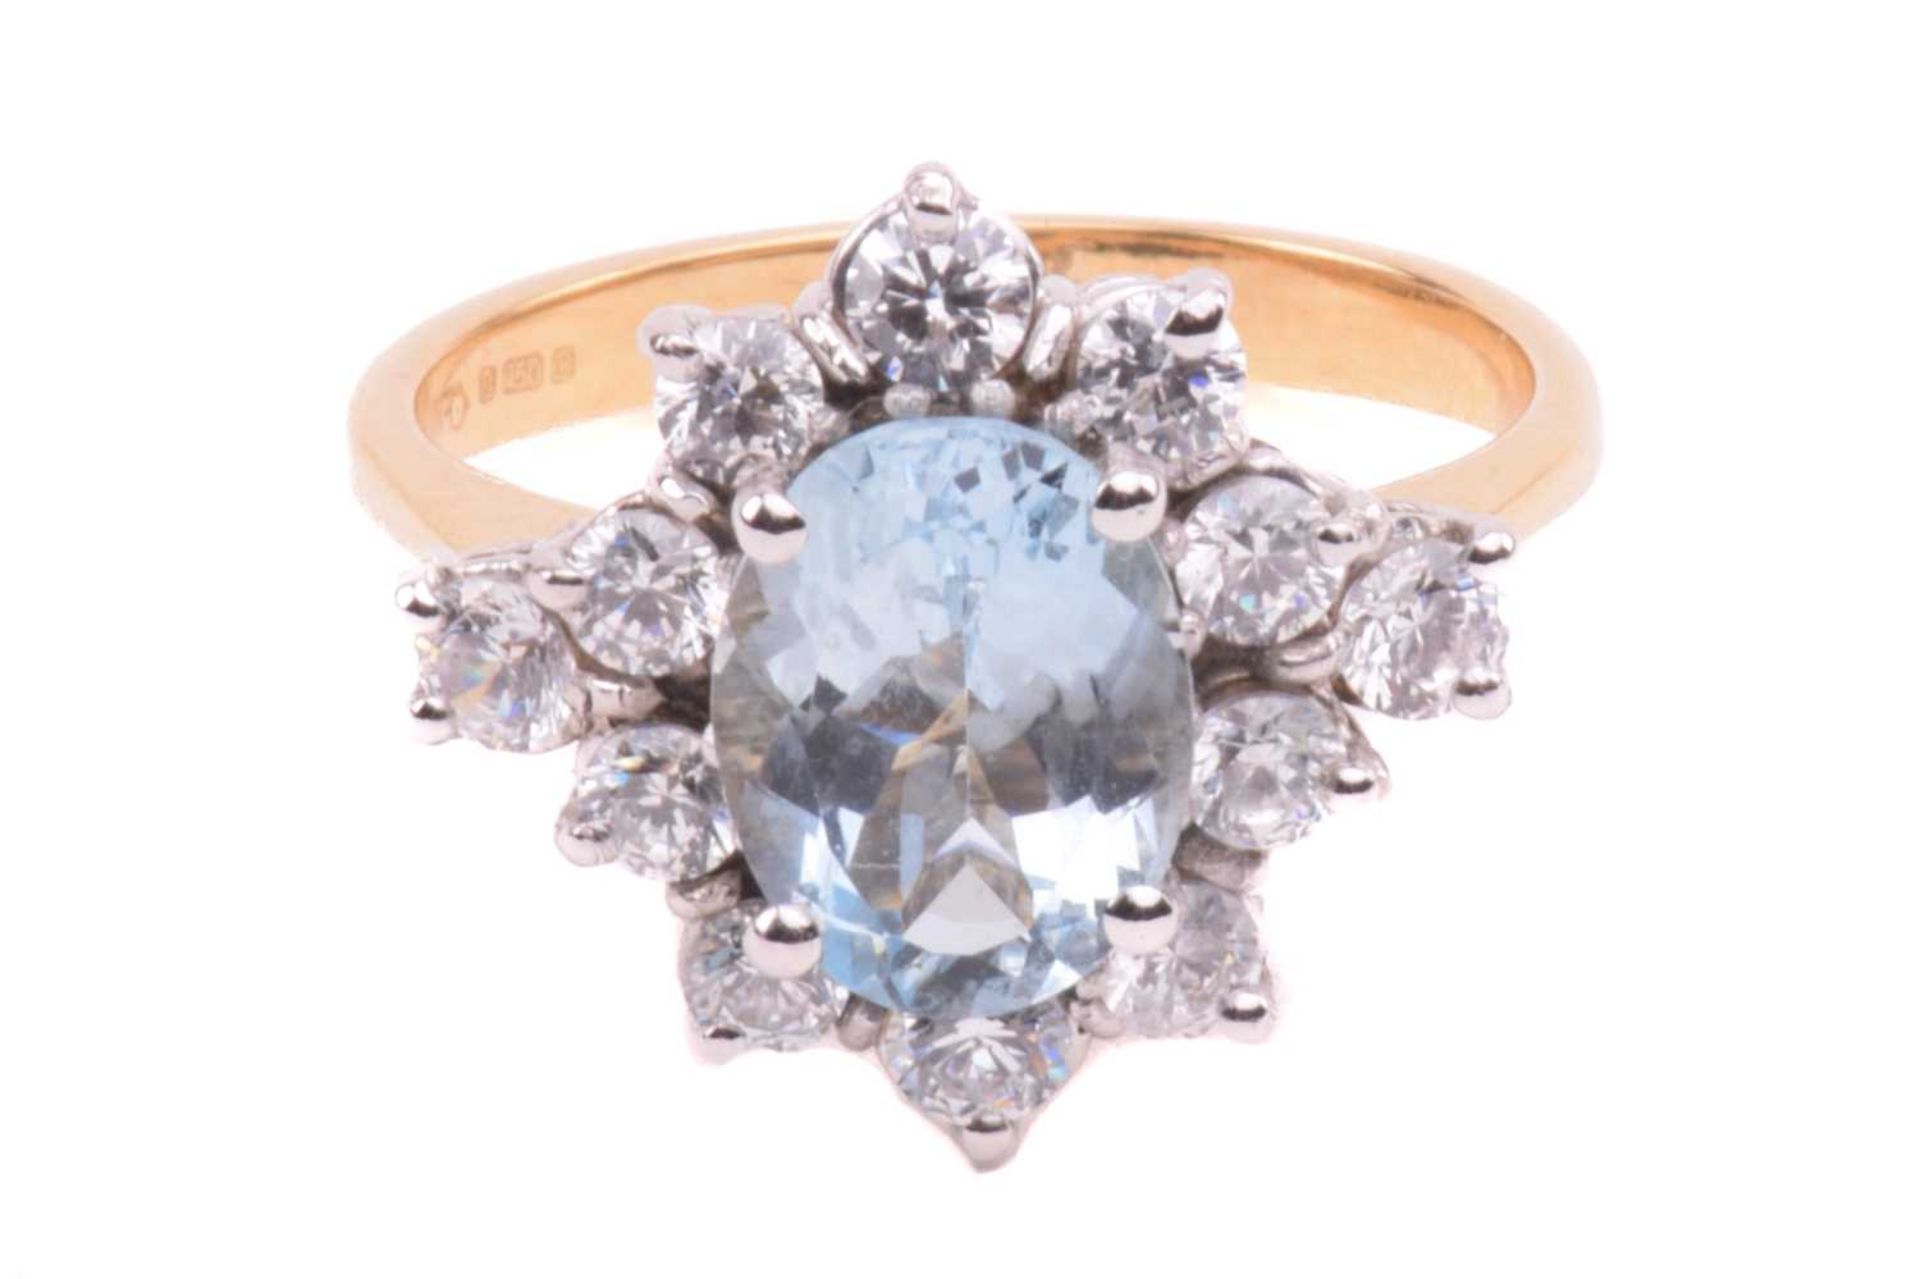 An aquamarine and CZ cluster ring in 18ct gold, comprising an oval-cut aquamarine of light blue